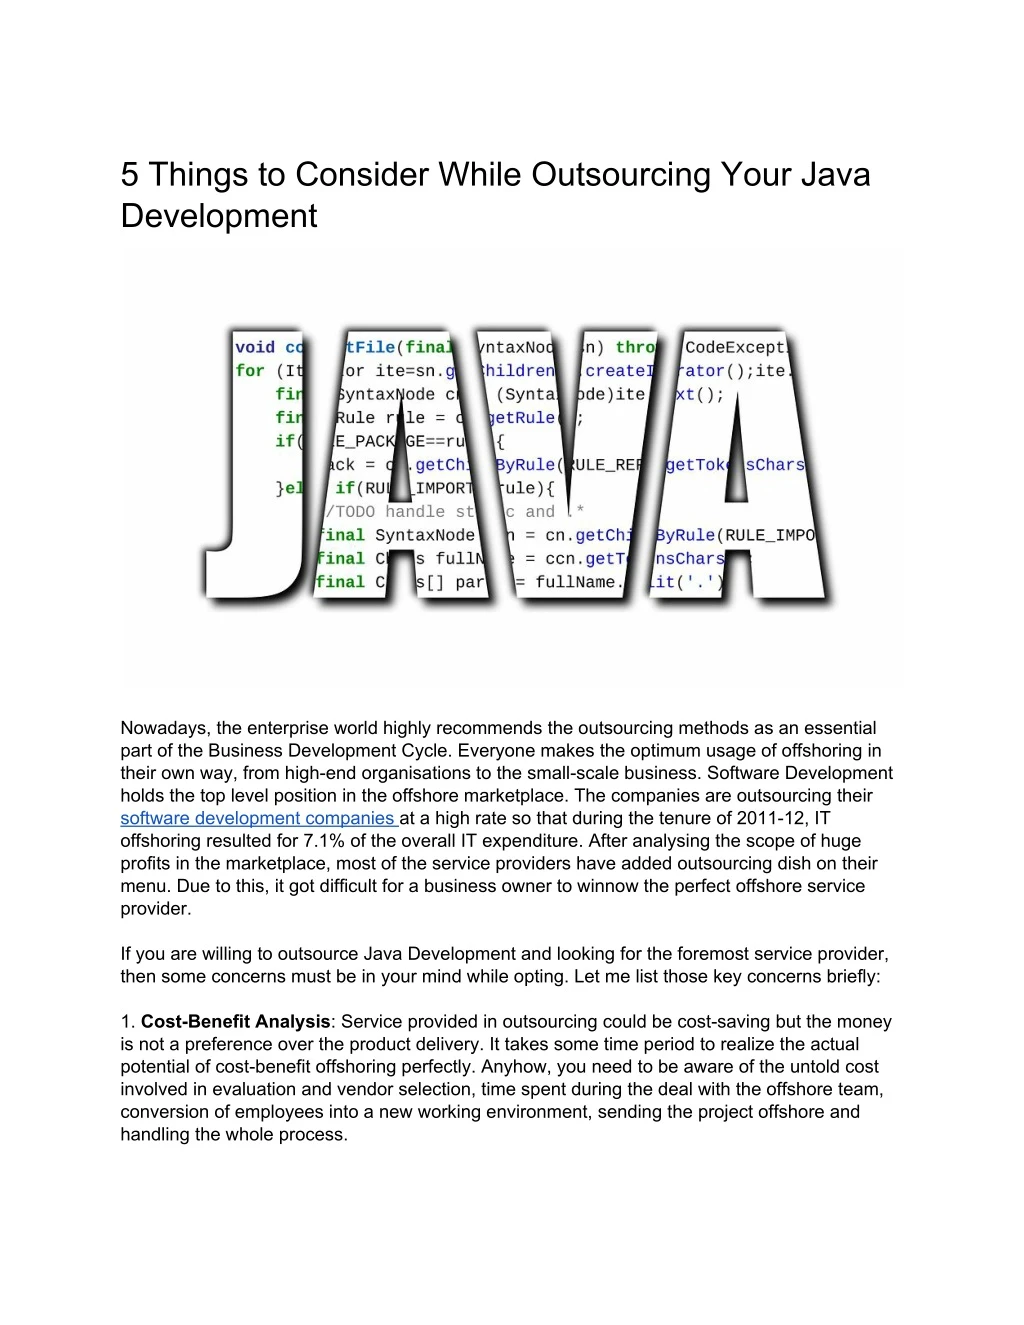 5 things to consider while outsourcing your java